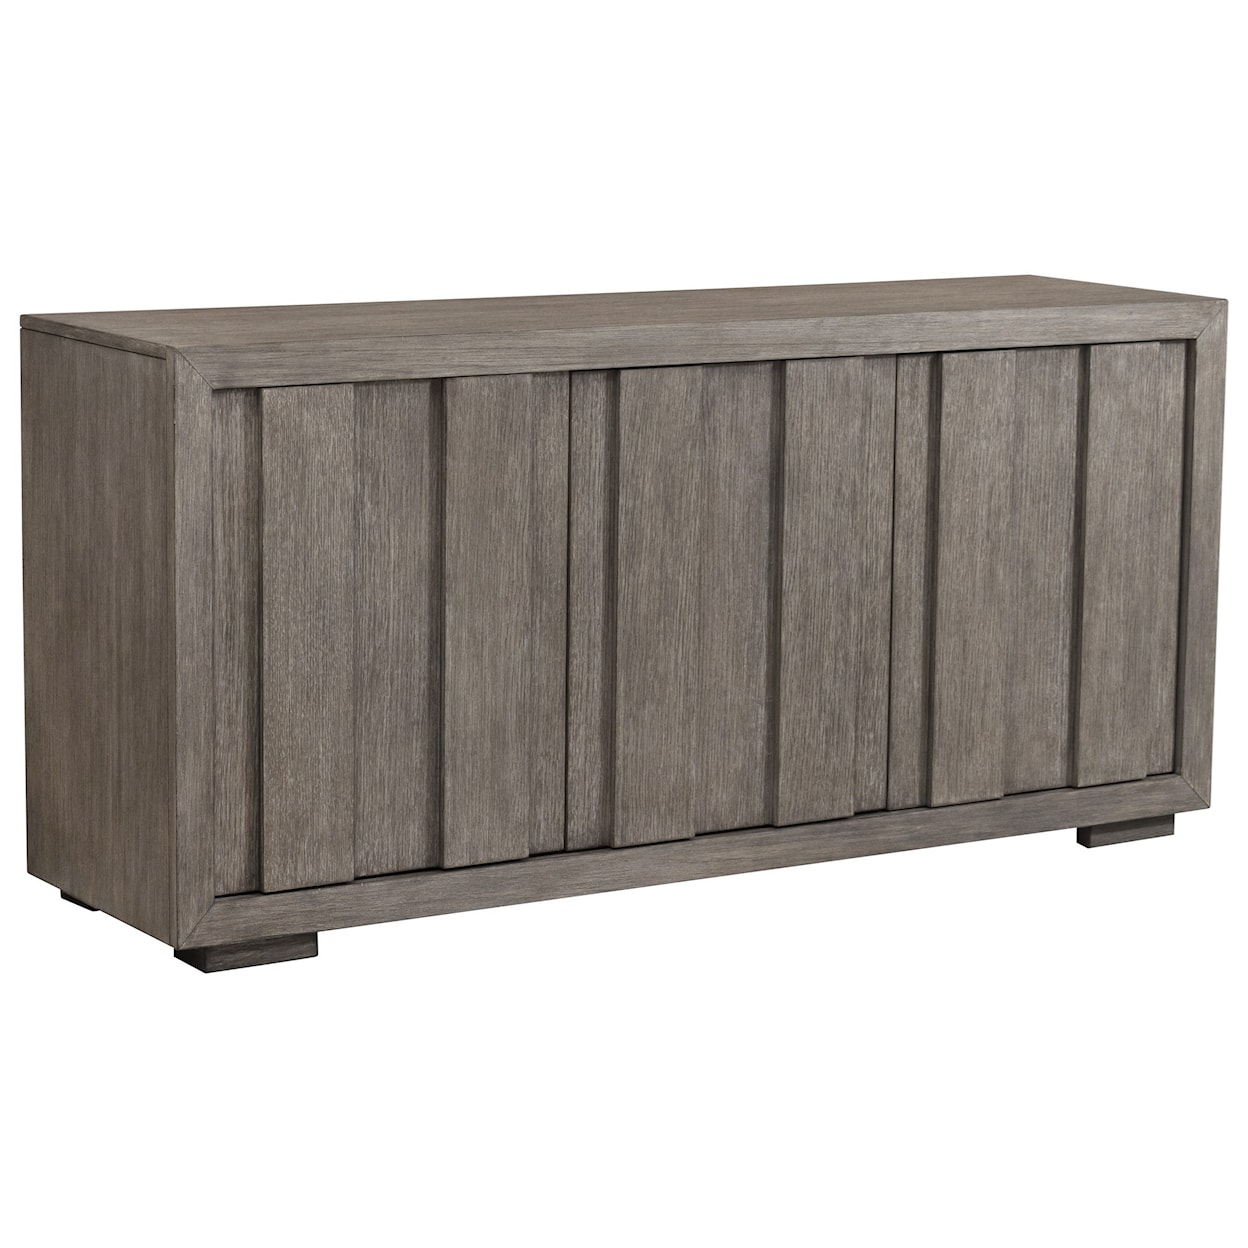 Accentrics Home TruModern Sideboard